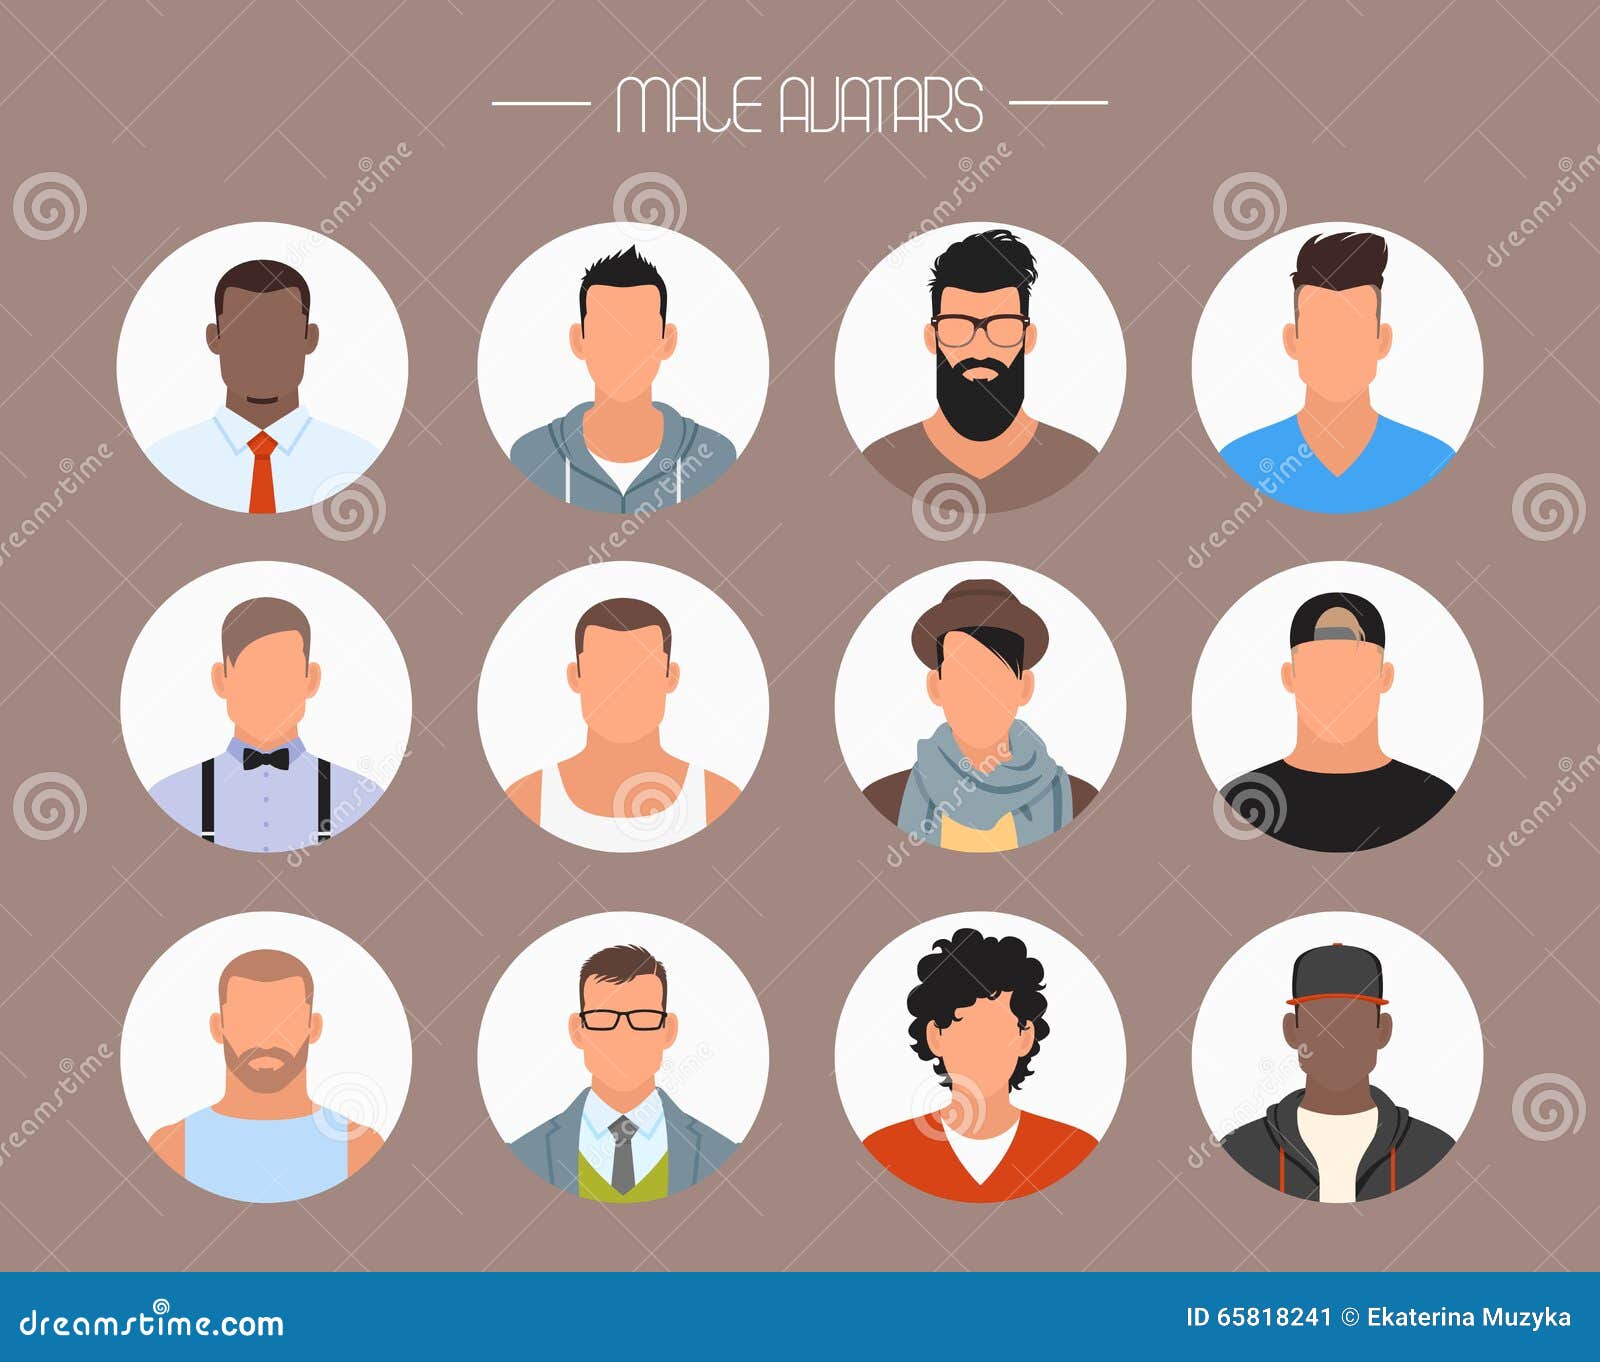 Create notion styled avatar for you by Handdrawnideas  Fiverr